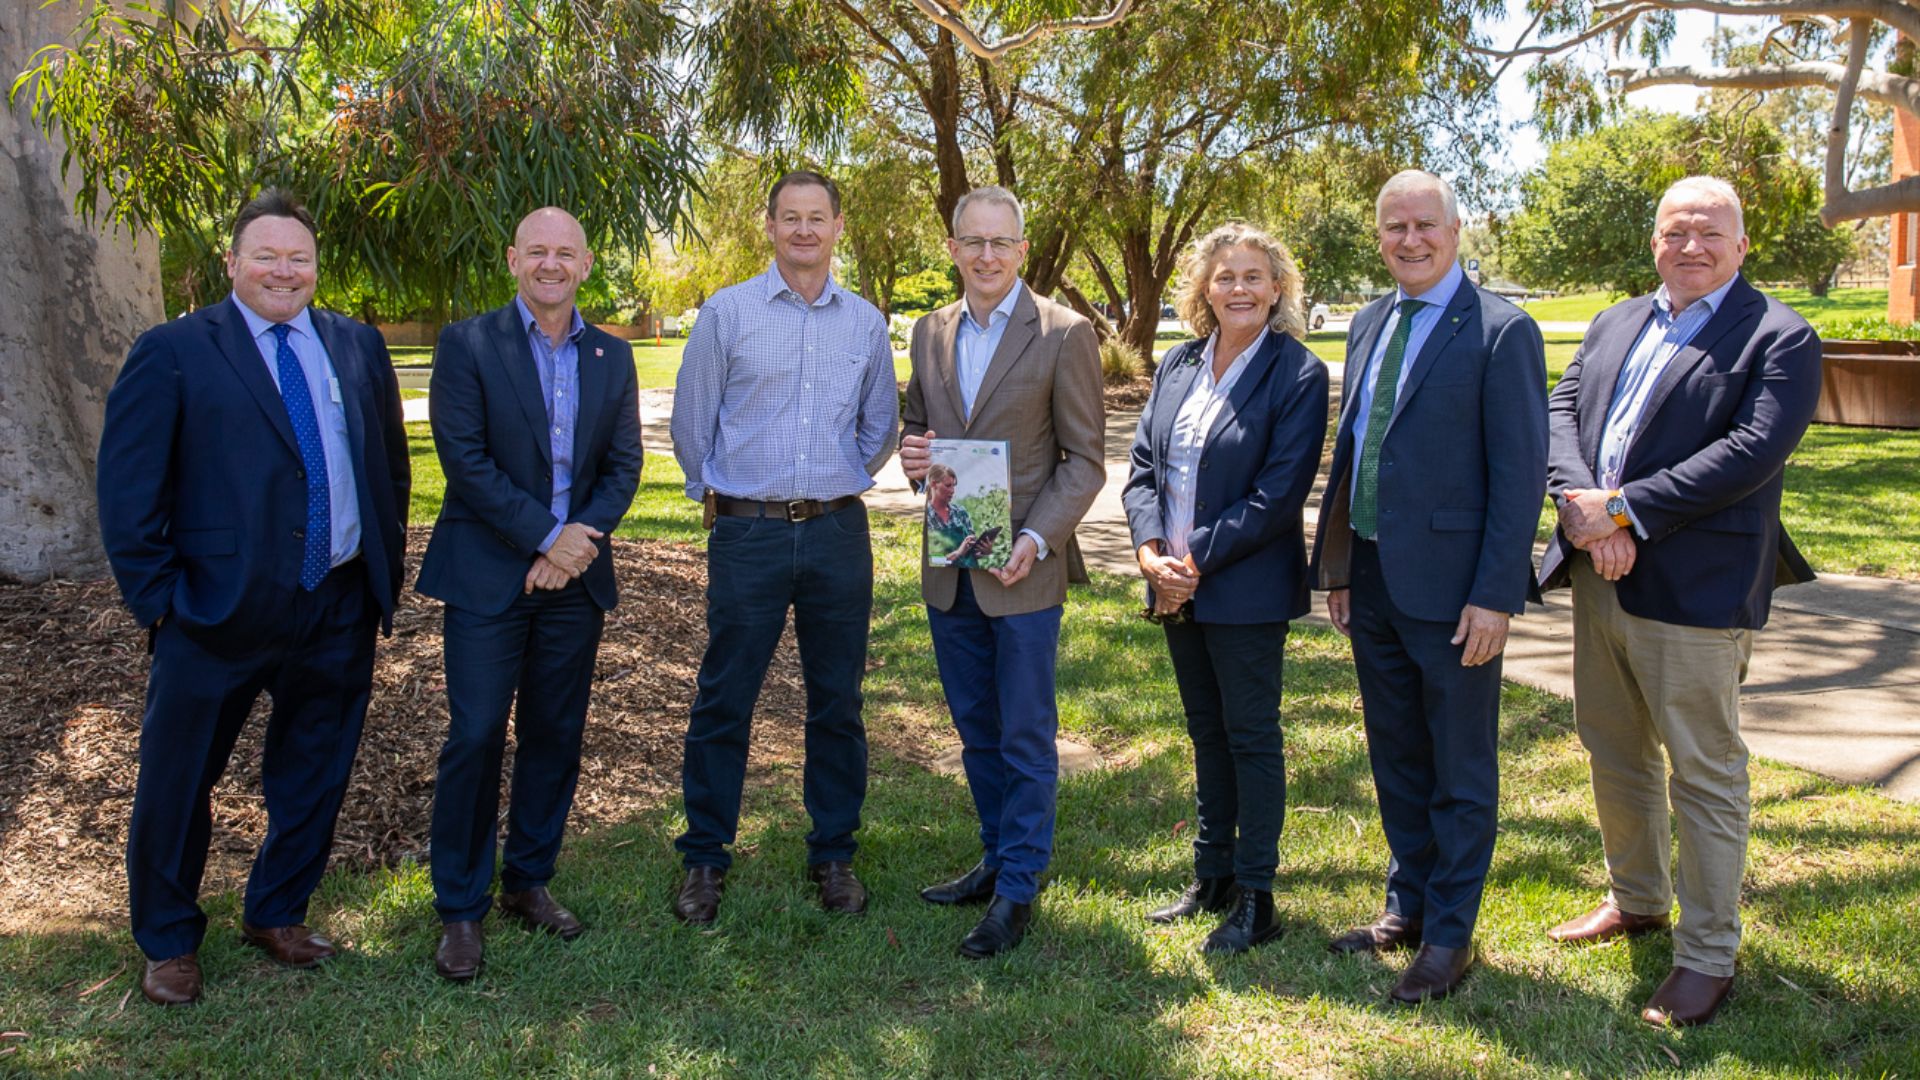 Minister launches agriculture connectivity paper at Charles Sturt in Wagga Wagga 